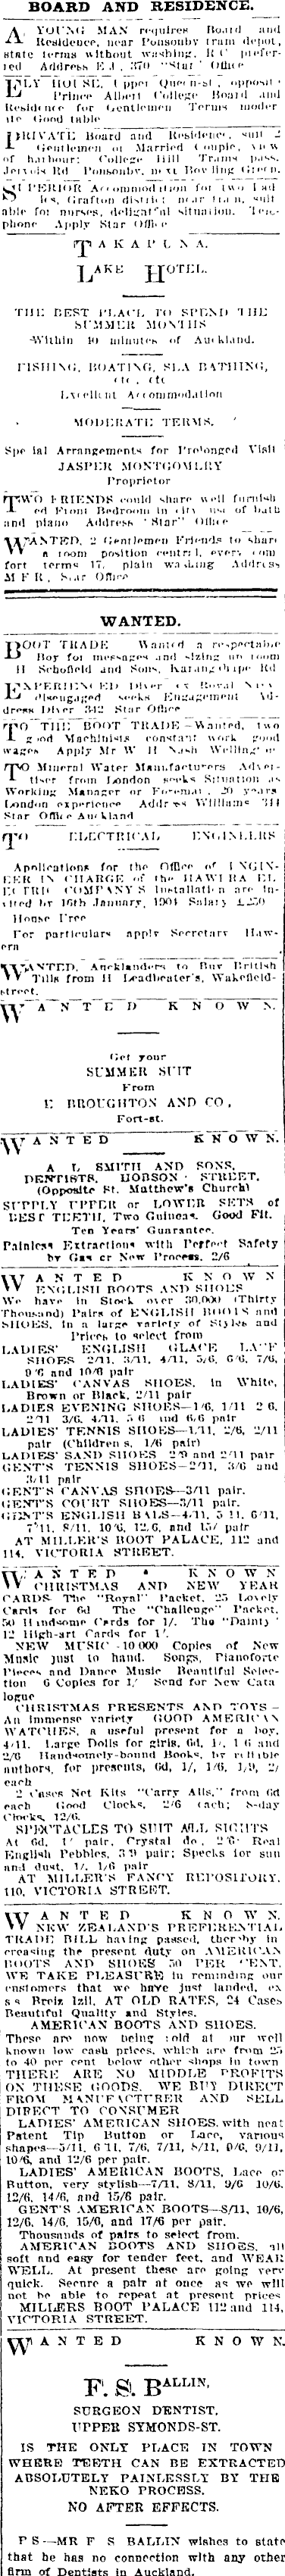 Papers Past Newspapers Auckland Star 14 December 1903 Page 1 Advertisements Column 6